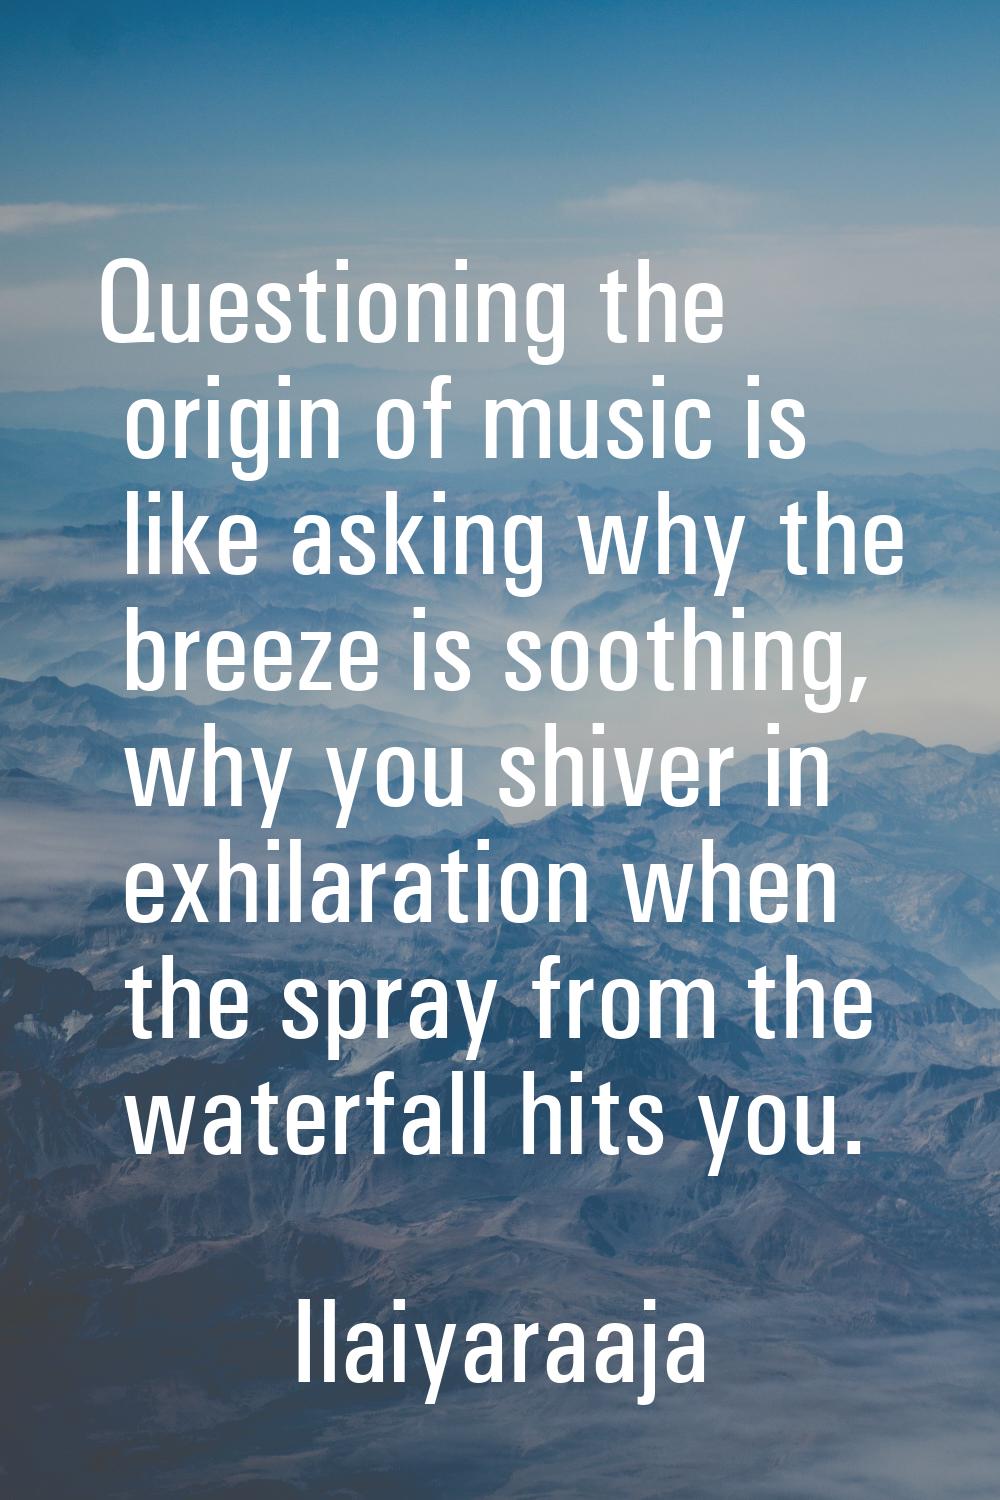 Questioning the origin of music is like asking why the breeze is soothing, why you shiver in exhila